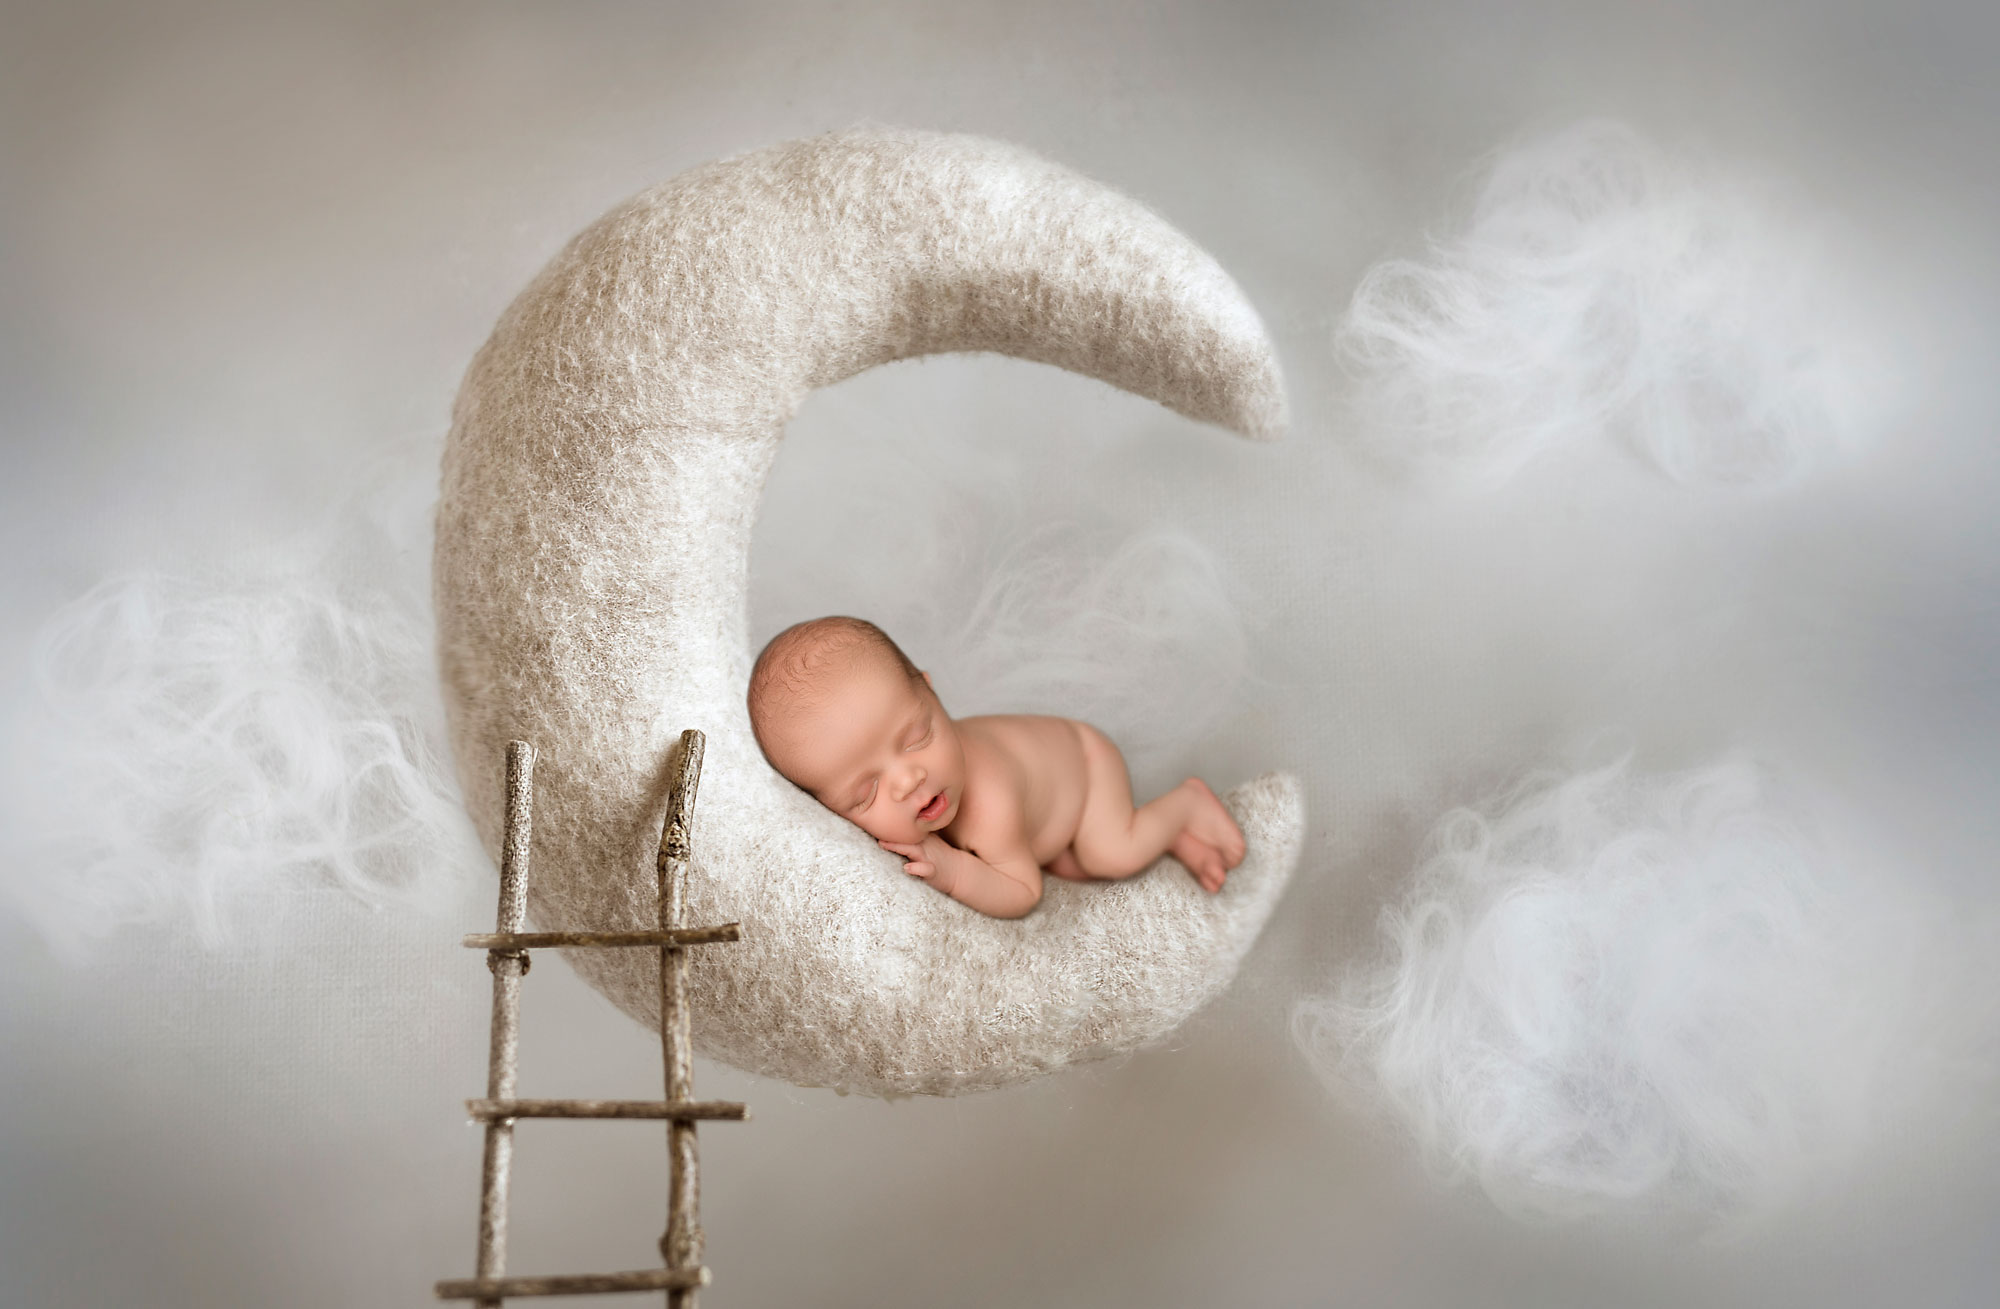 newborn photo session near bergen county nj, baby asleep on moon with wooden ladder and cloudy sky